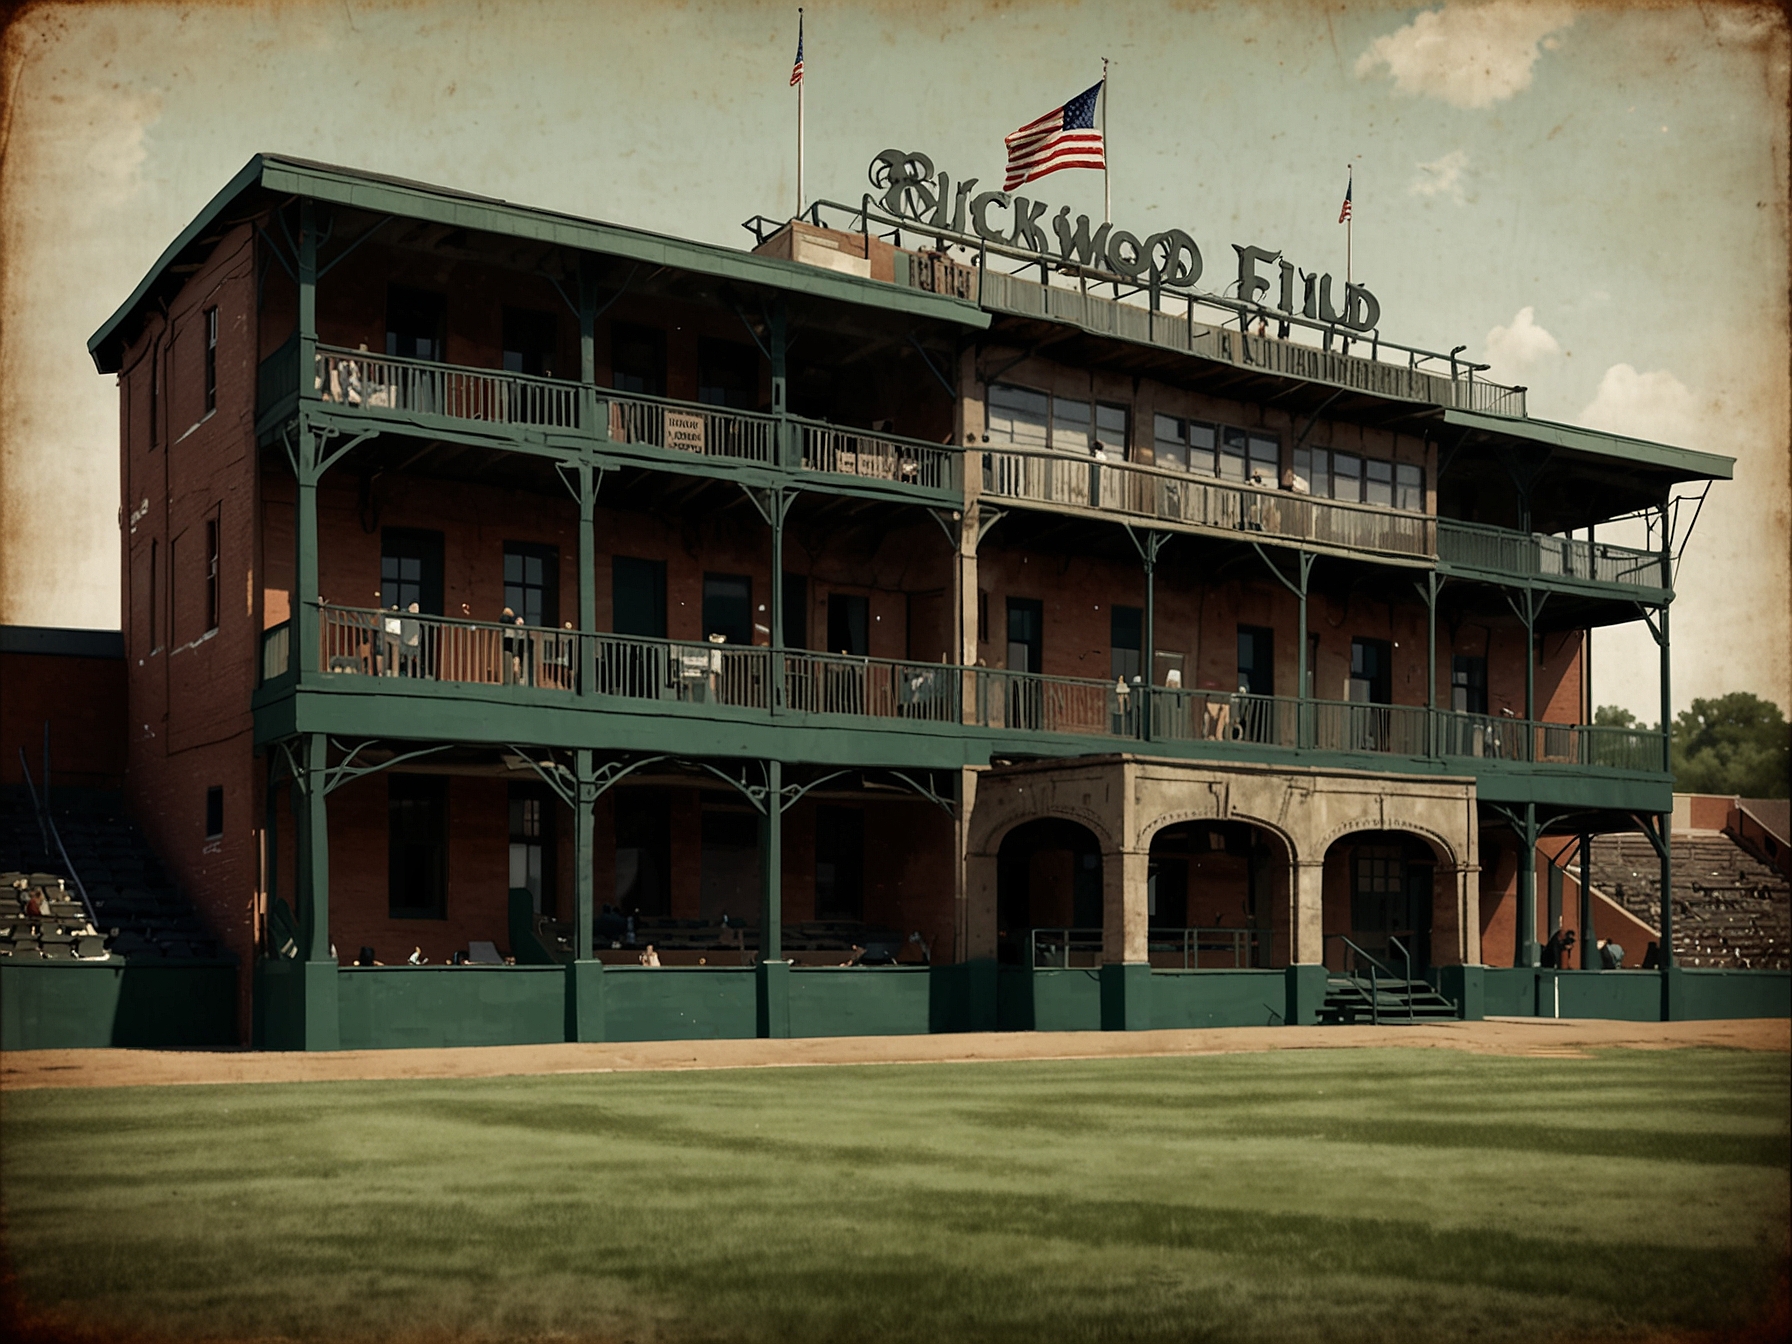 Rickwood Field in Birmingham, Alabama, serves as the historical backdrop for Jackson's moving narrative, symbolizing both the progress and the painful history of segregation in baseball.